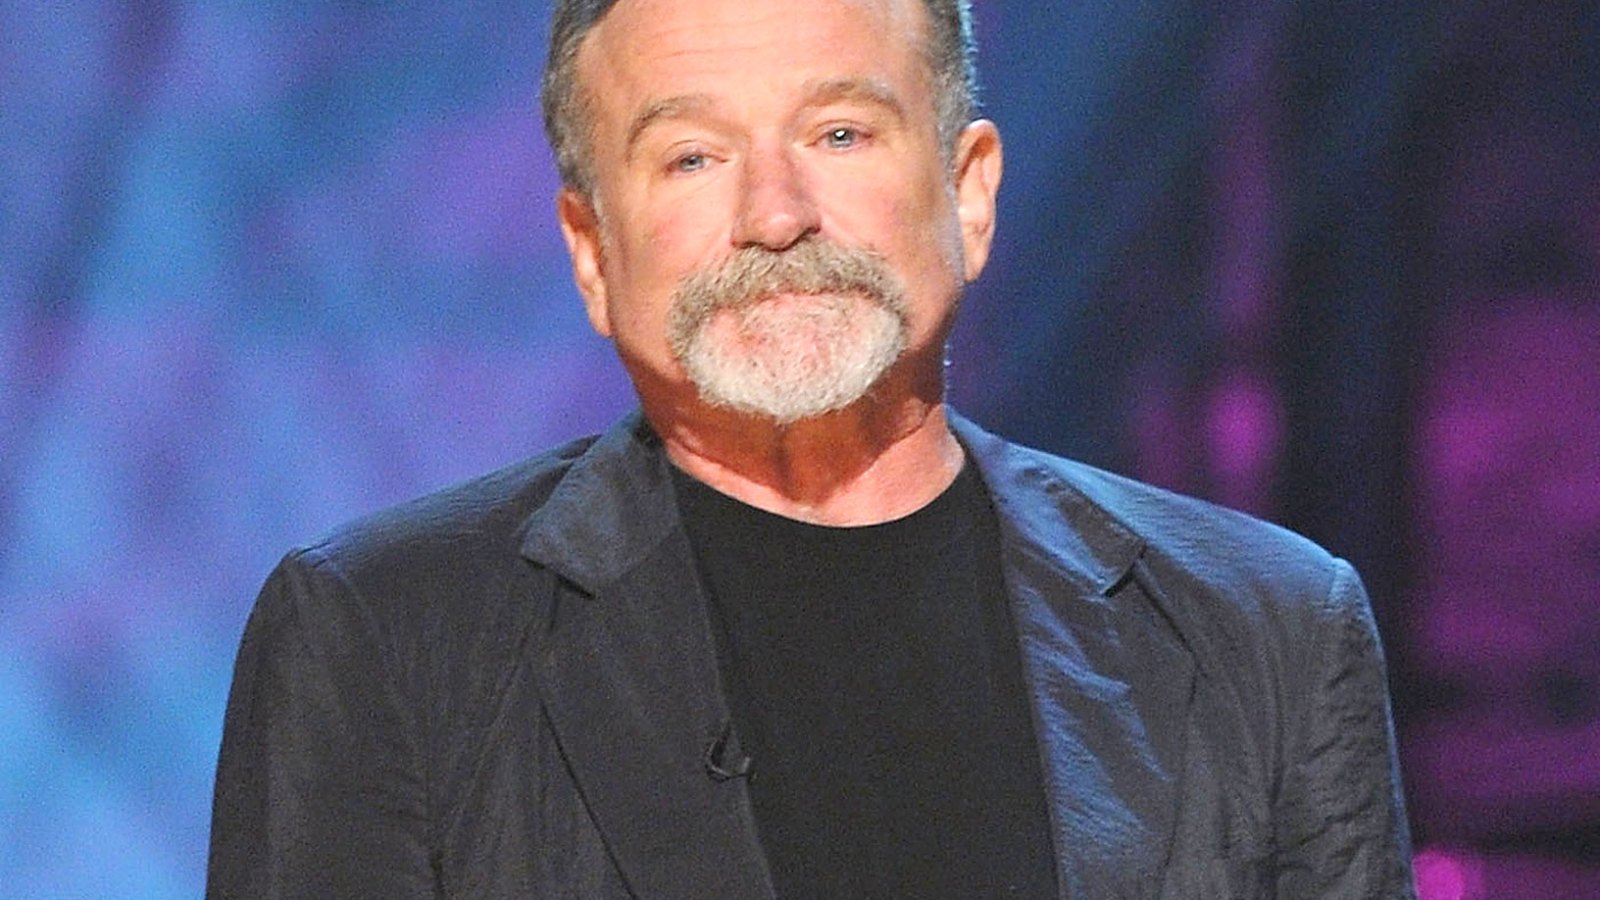 Robin Williams spoke of his depression in the years leading up to his